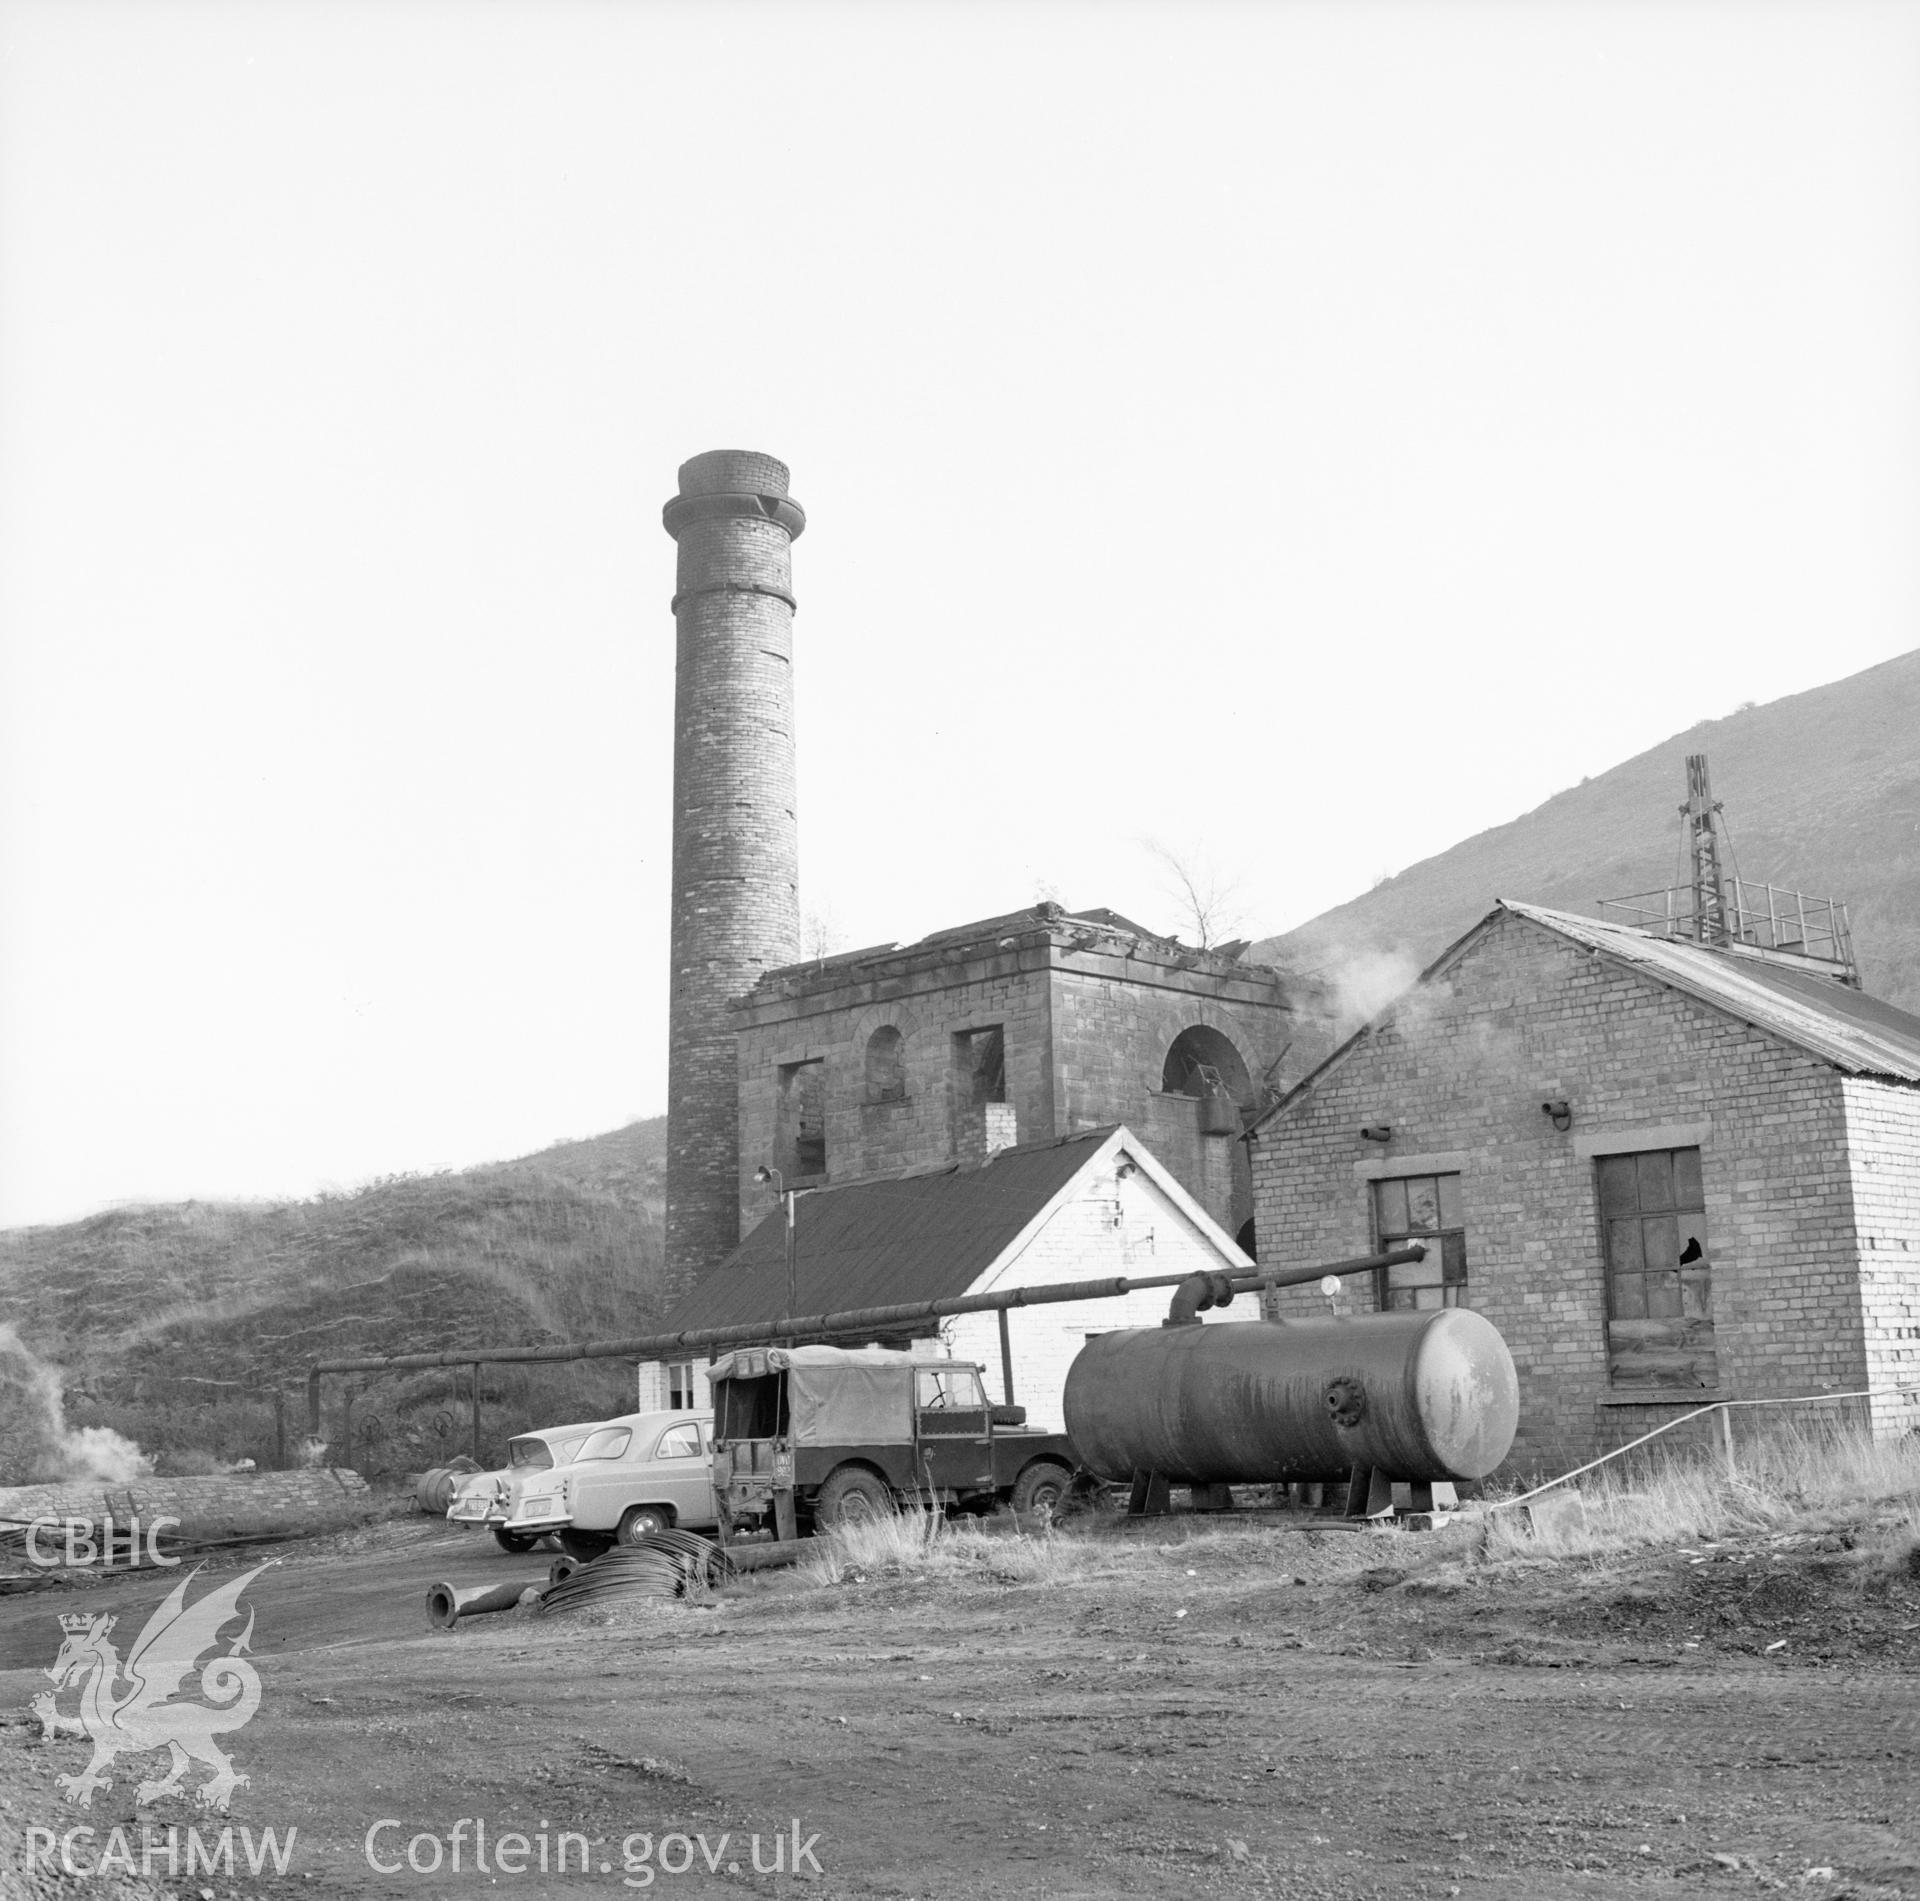 Digital copy of a black and white photo showing an exterior view of Glyn Pit, Pontypool.